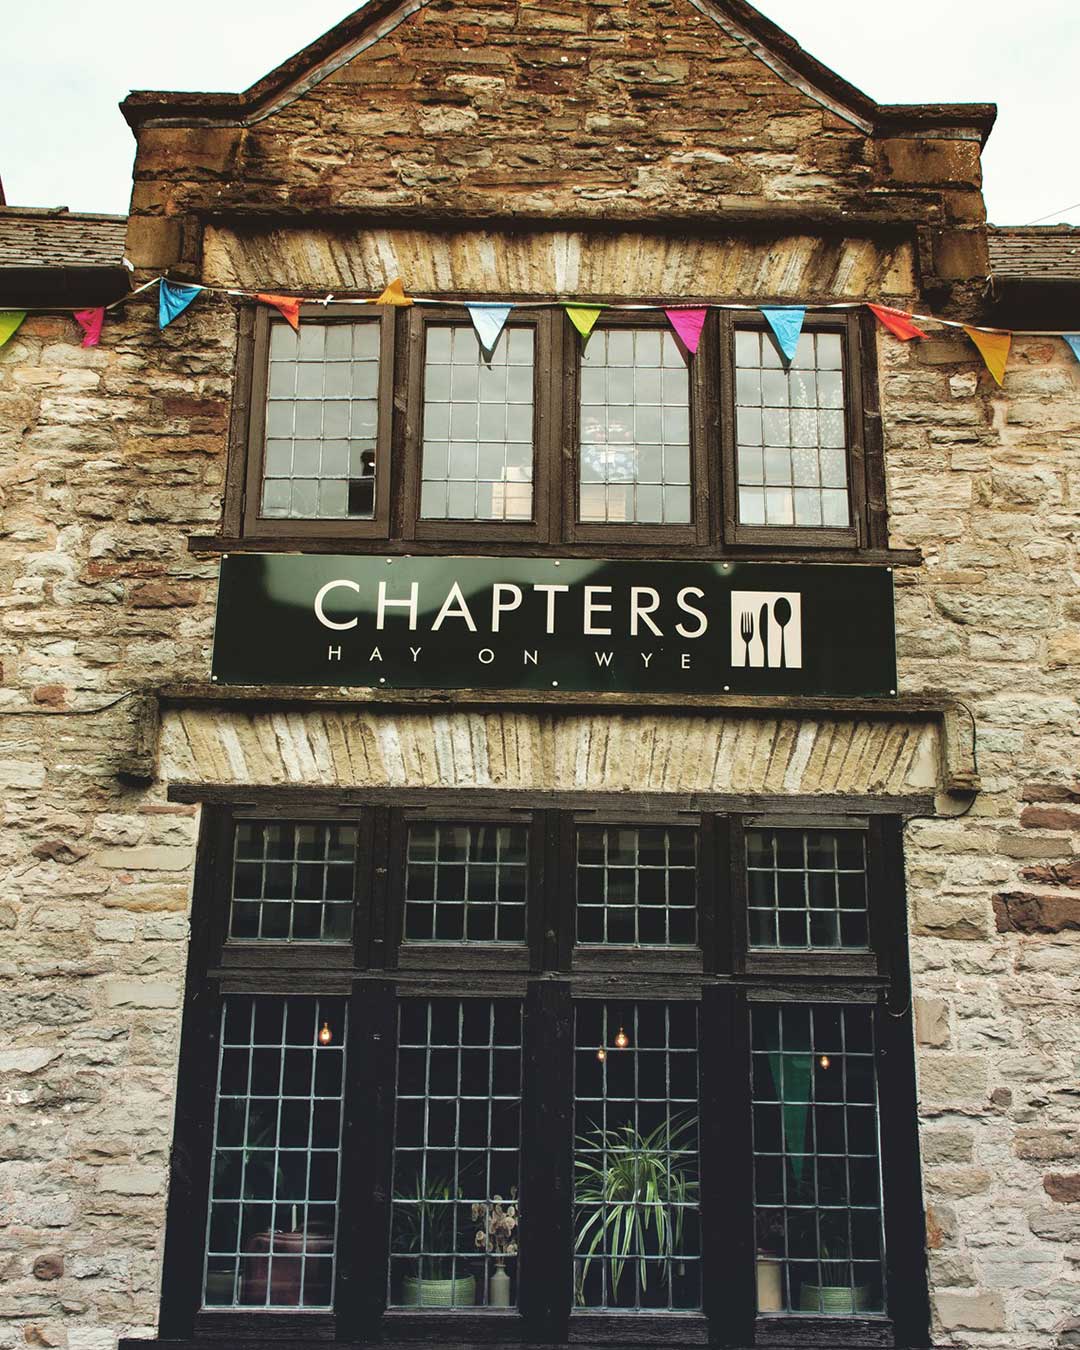 The exterior of Chapters restaurant in Hay-on-Wye